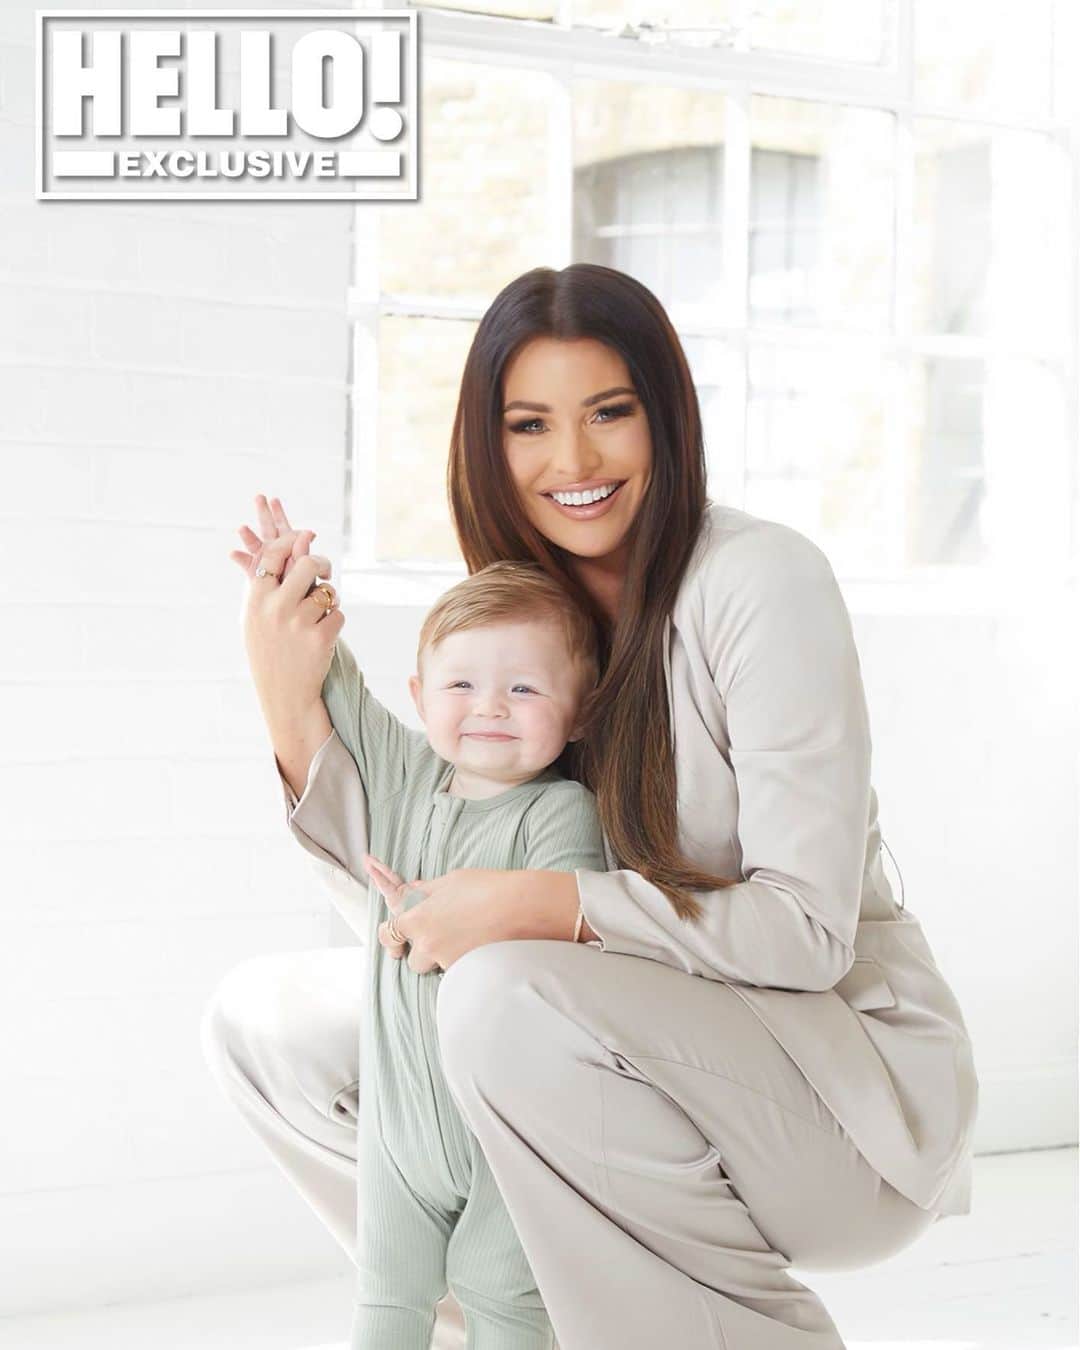 Jessica Wrightのインスタグラム：「Excited to share a preview of my exclusive photoshoot with @hellomag for Presley’s 1st birthday this week 🥳🎉 Click the link in bio to see more. We had such a fun day as always with an amazing team & feel so grateful to be able to celebrate my baby’s milestone with such beautiful pictures. Out tomorrow ❤️」